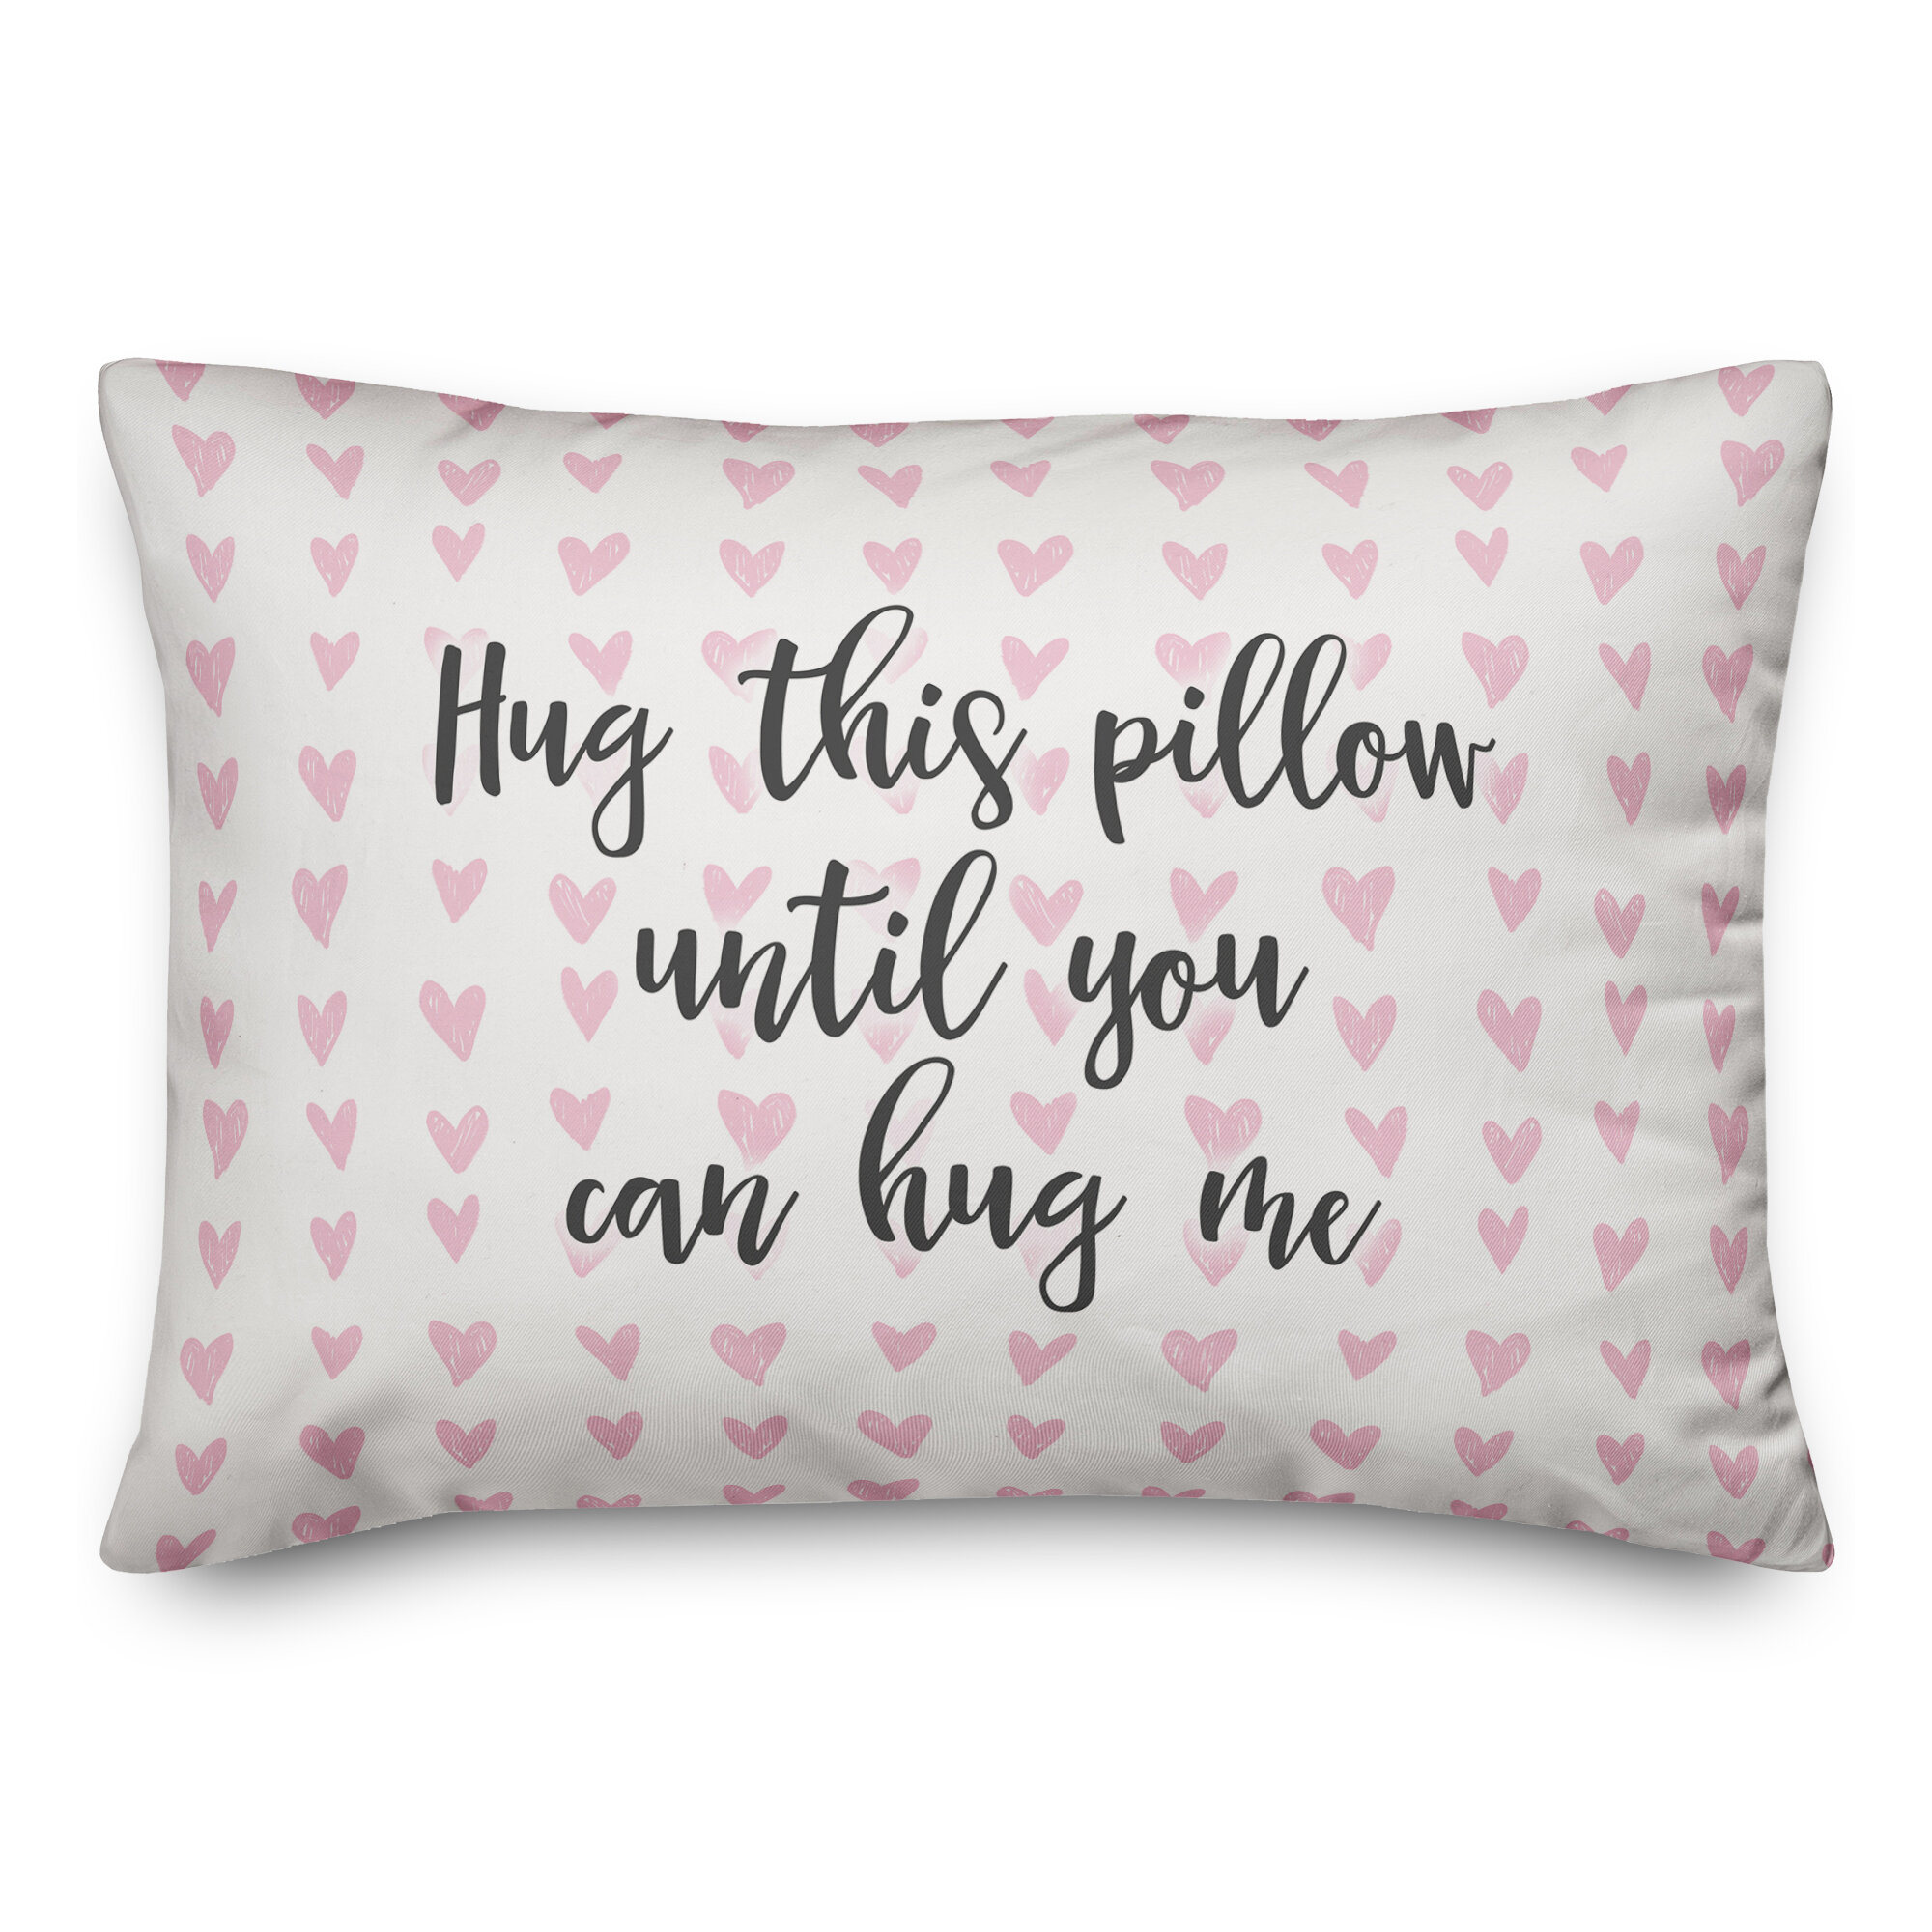 Ebern Designs The Lyell Collection Hug This Pillow Until You Can